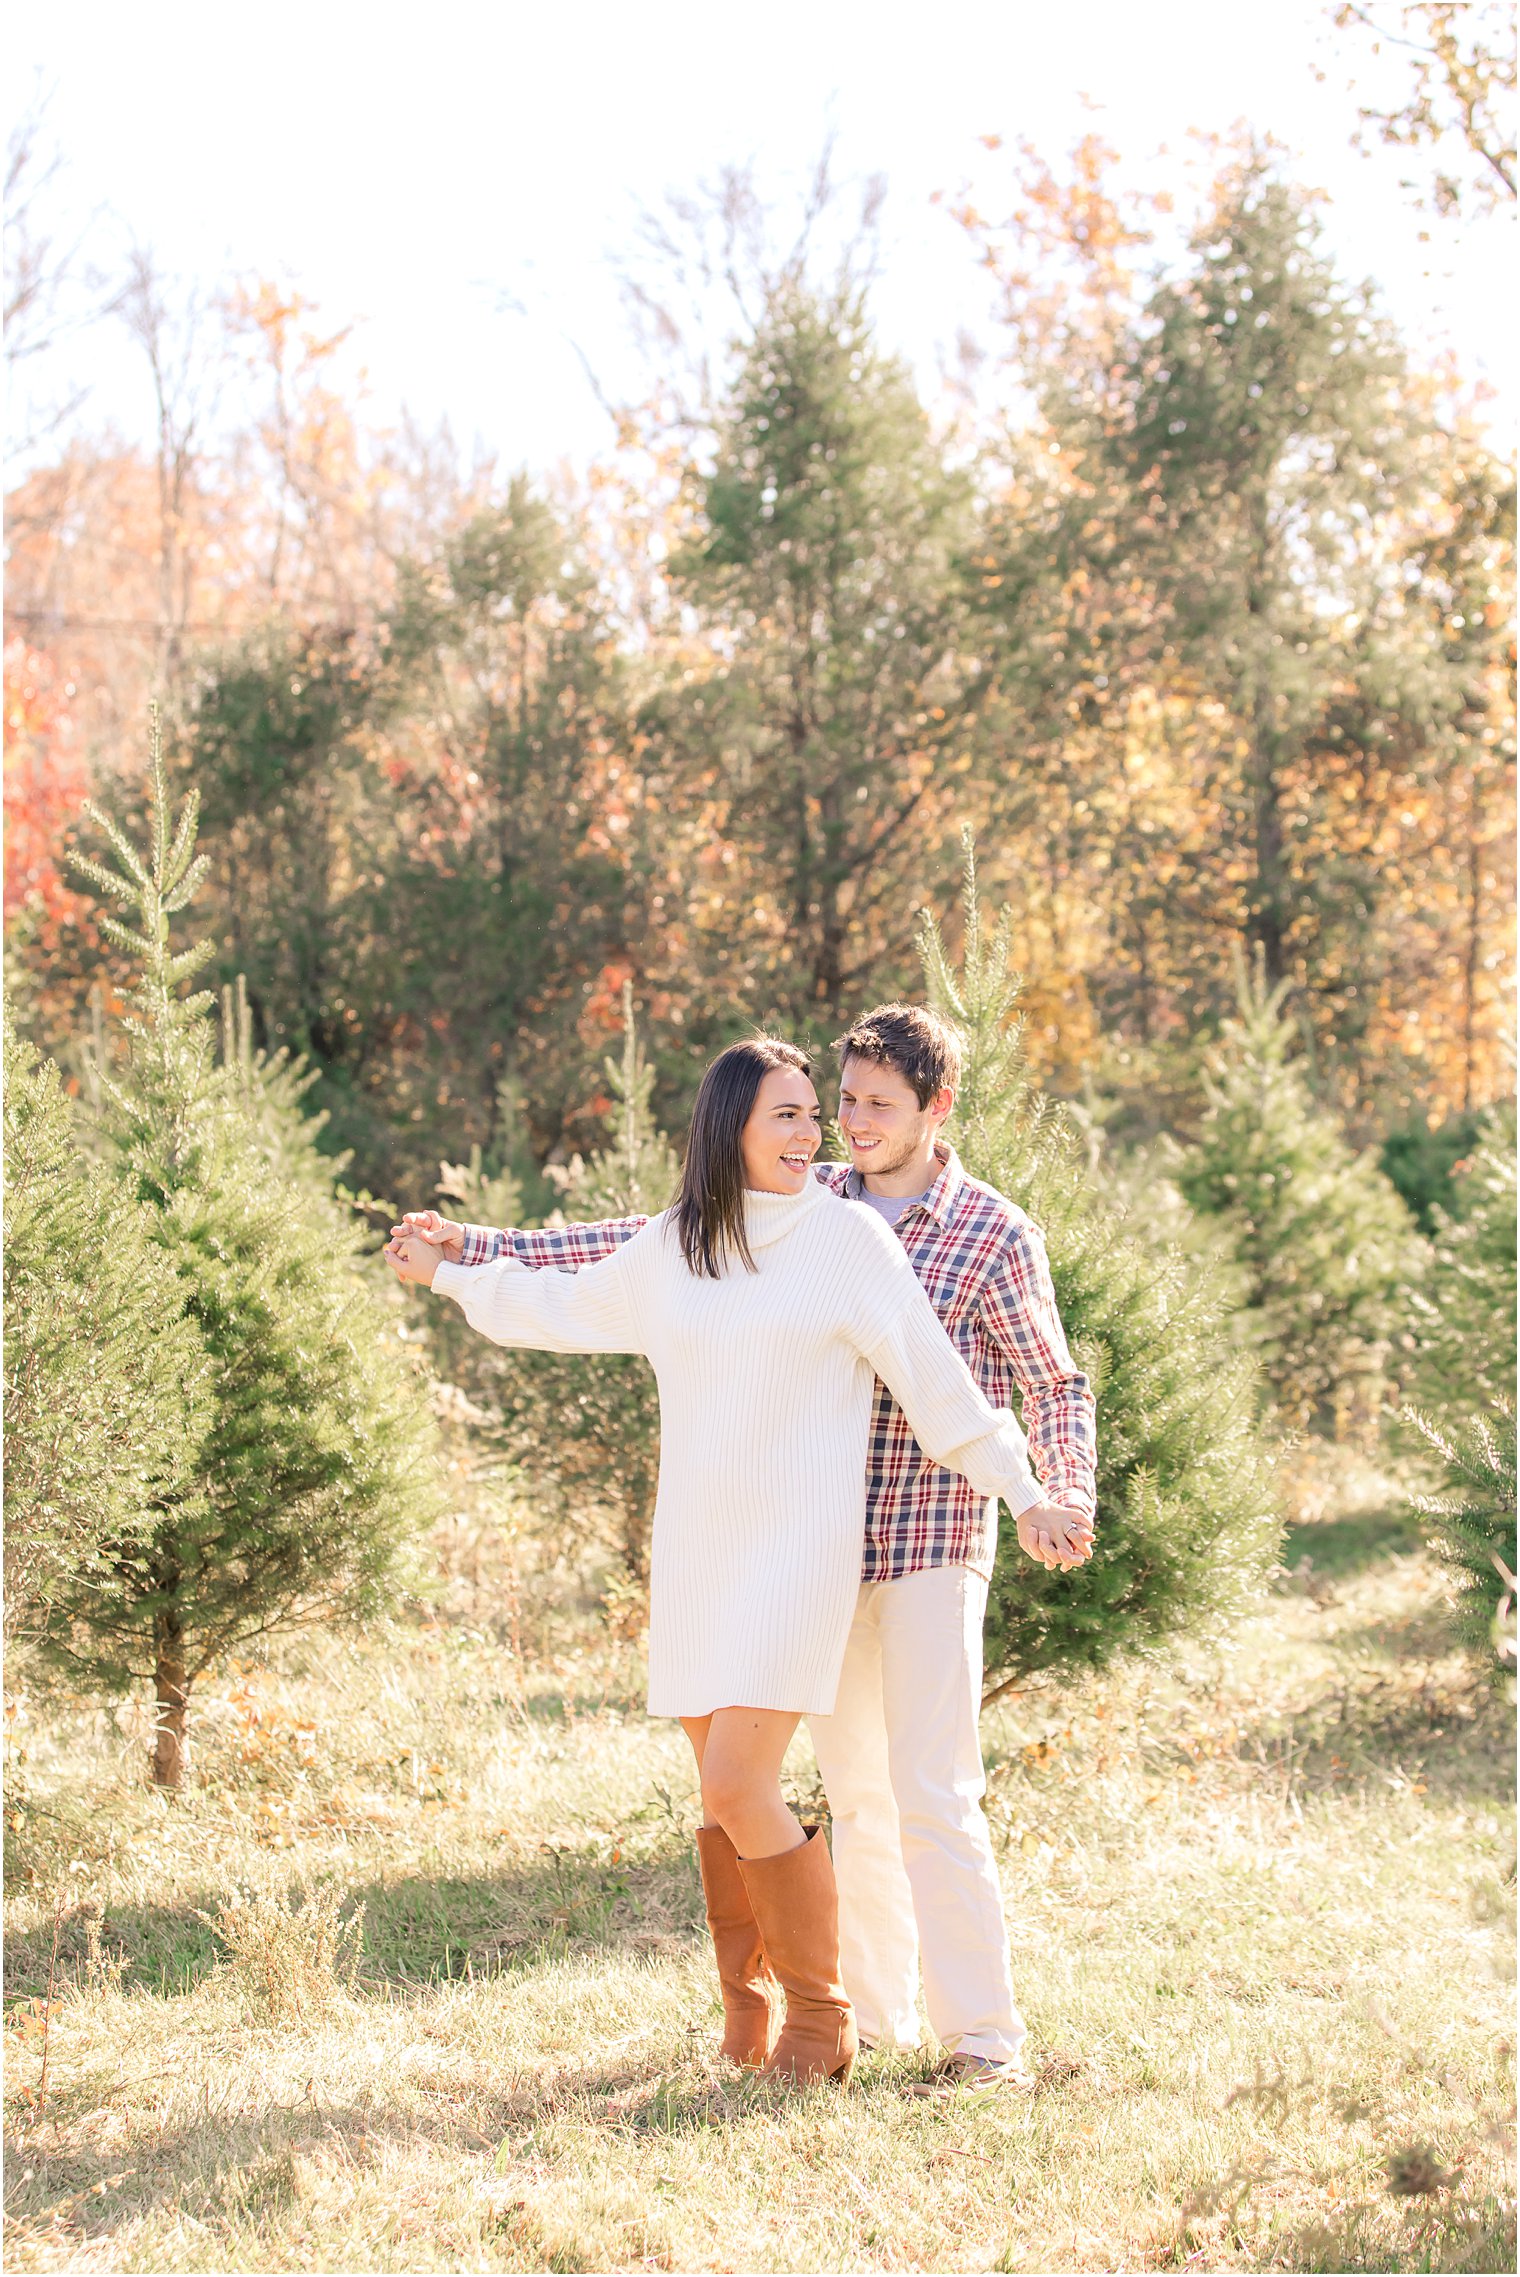 New Jersey engagement portraits by Christmas trees